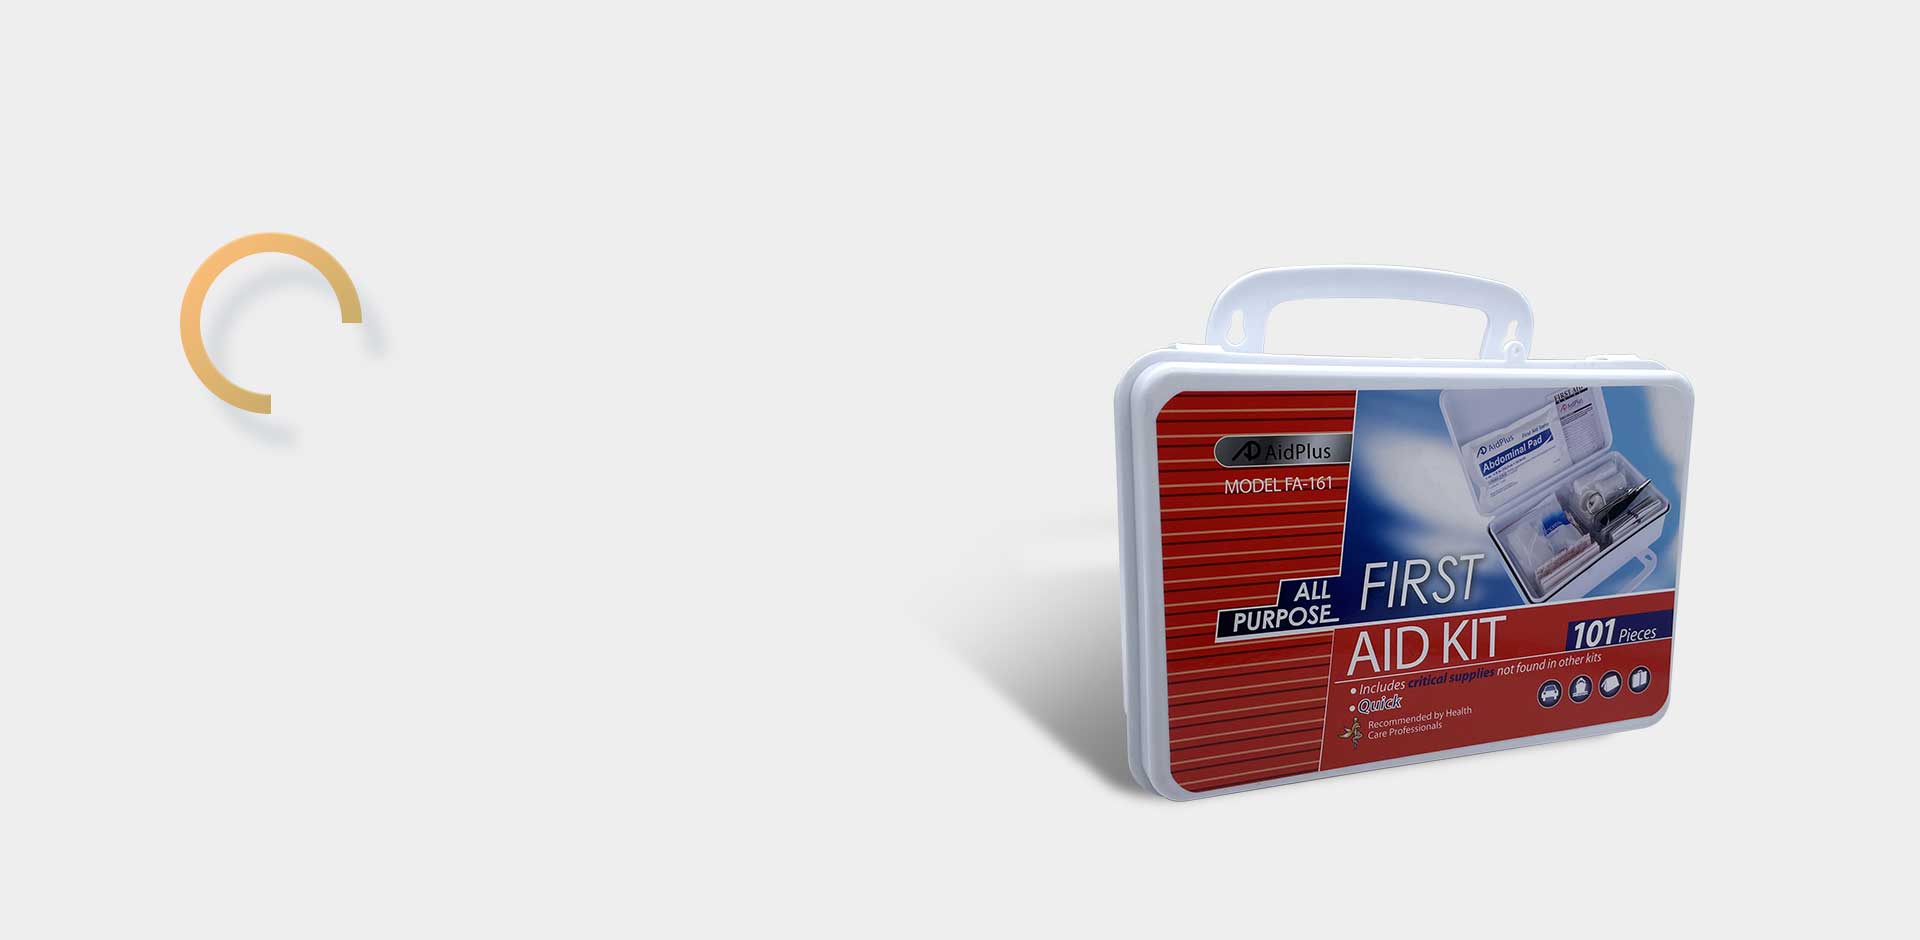 Find Quality First Aid Products Here